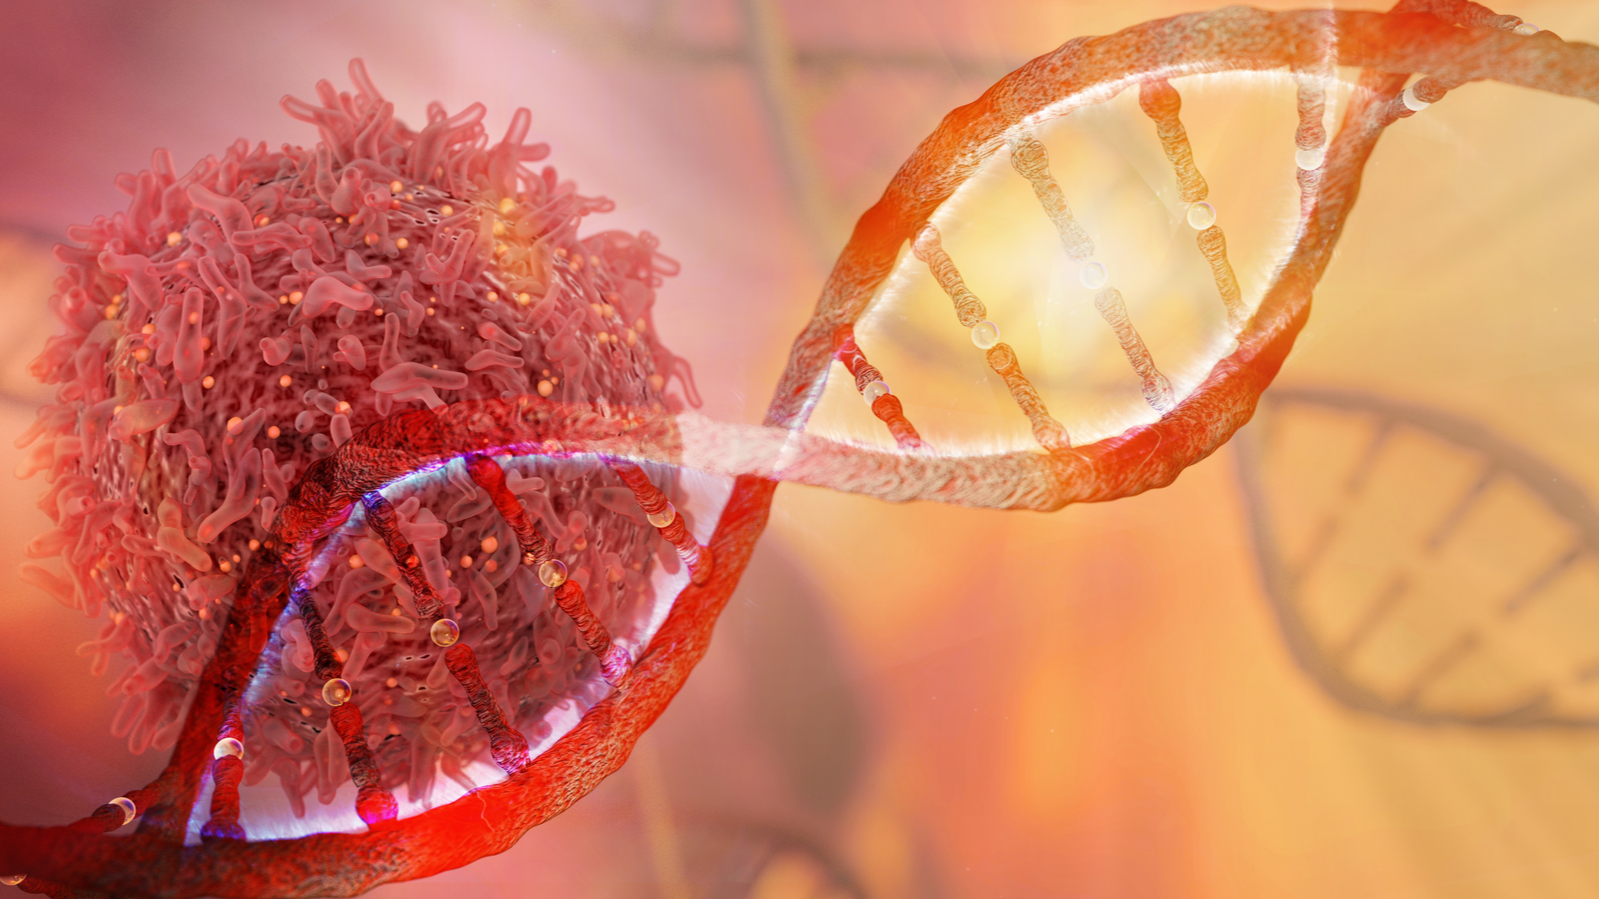 DNA strand and Cancer Cell Oncology Research Concept 3D rendering. GTHX Stock